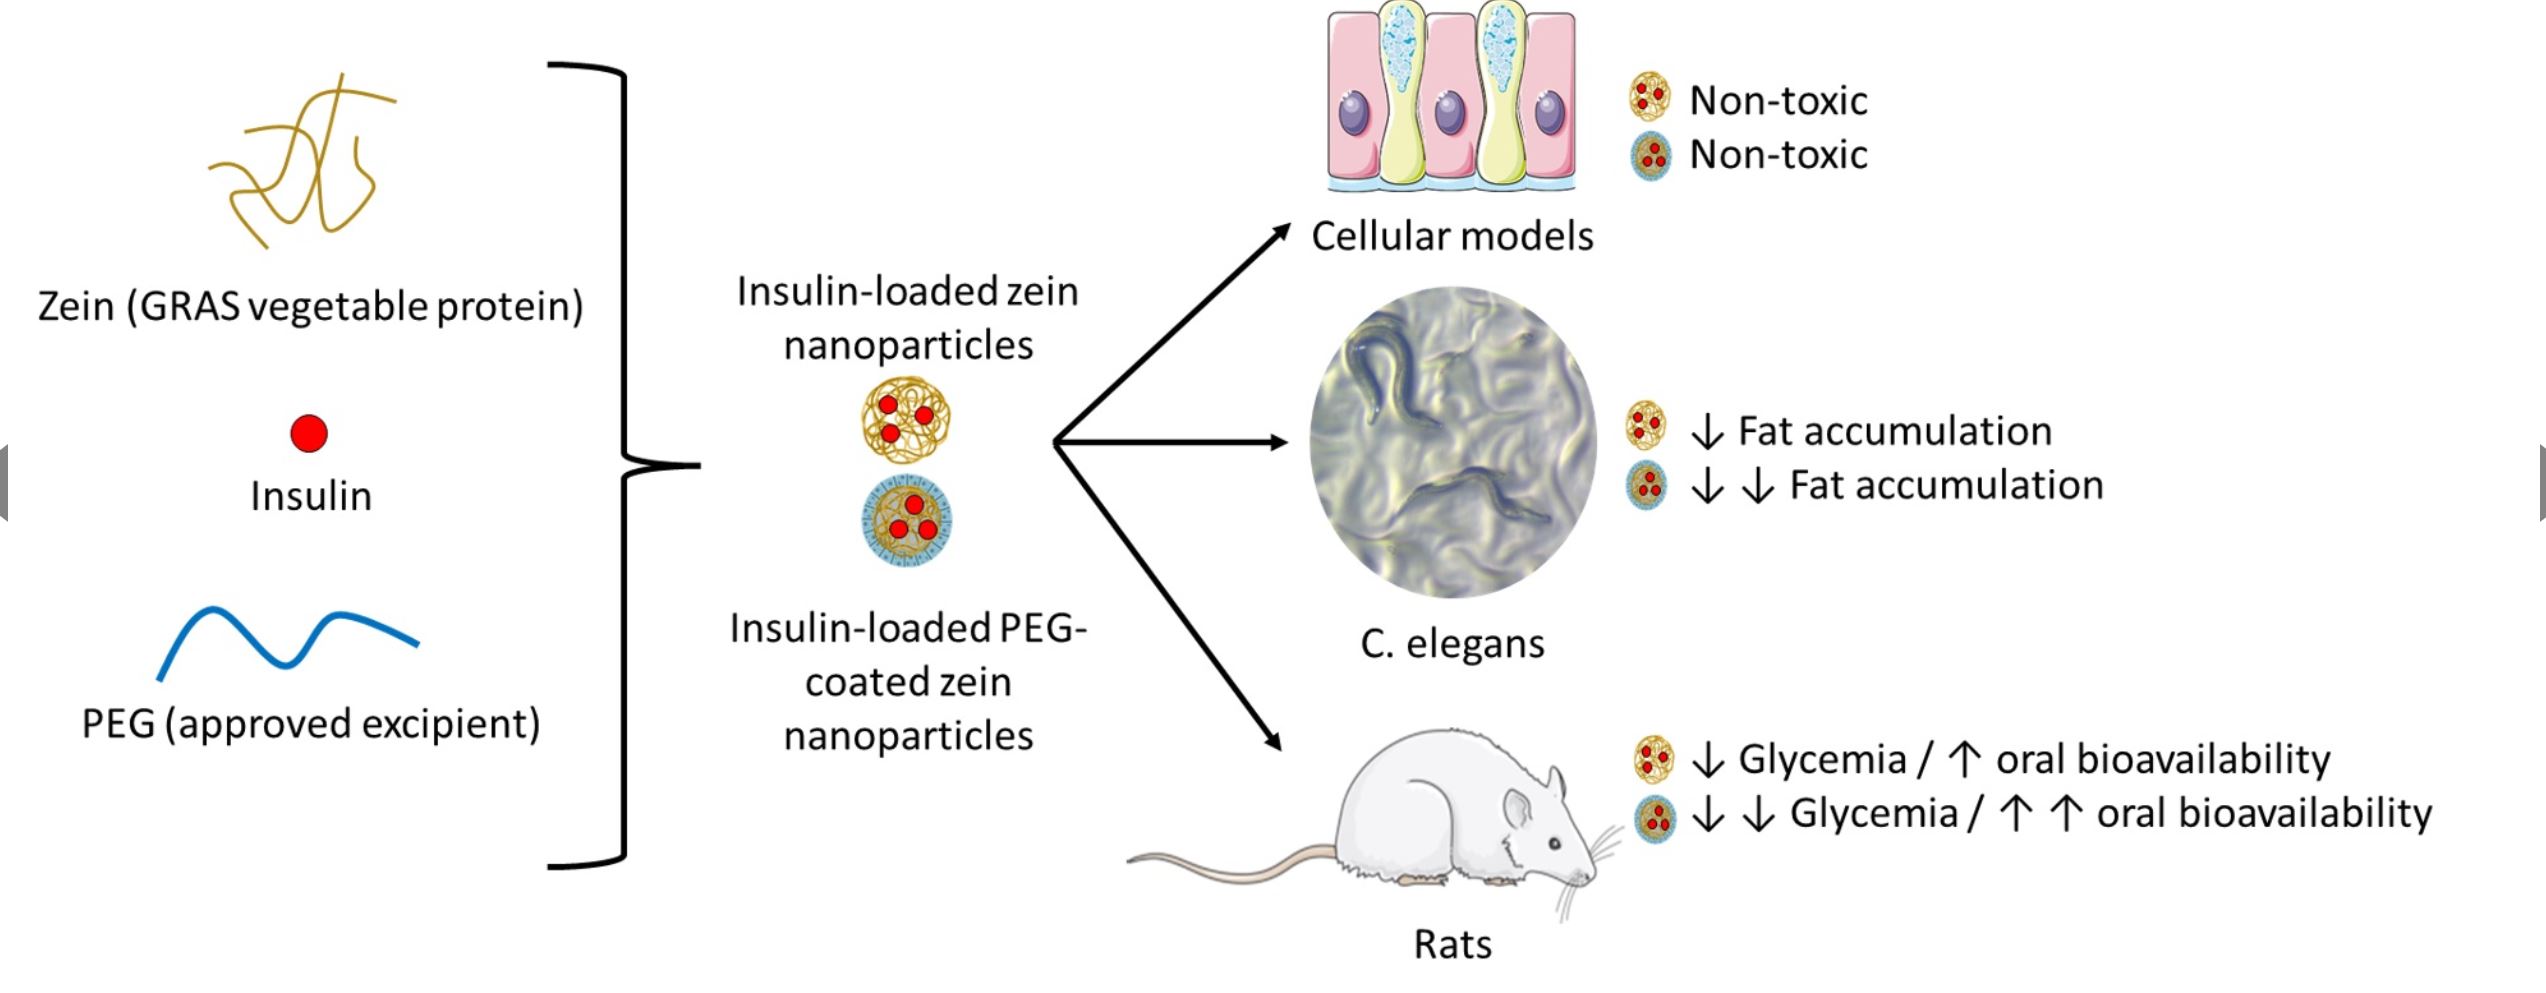 Zein-Based Nanoparticles as Oral Carriers for Insulin Delivery